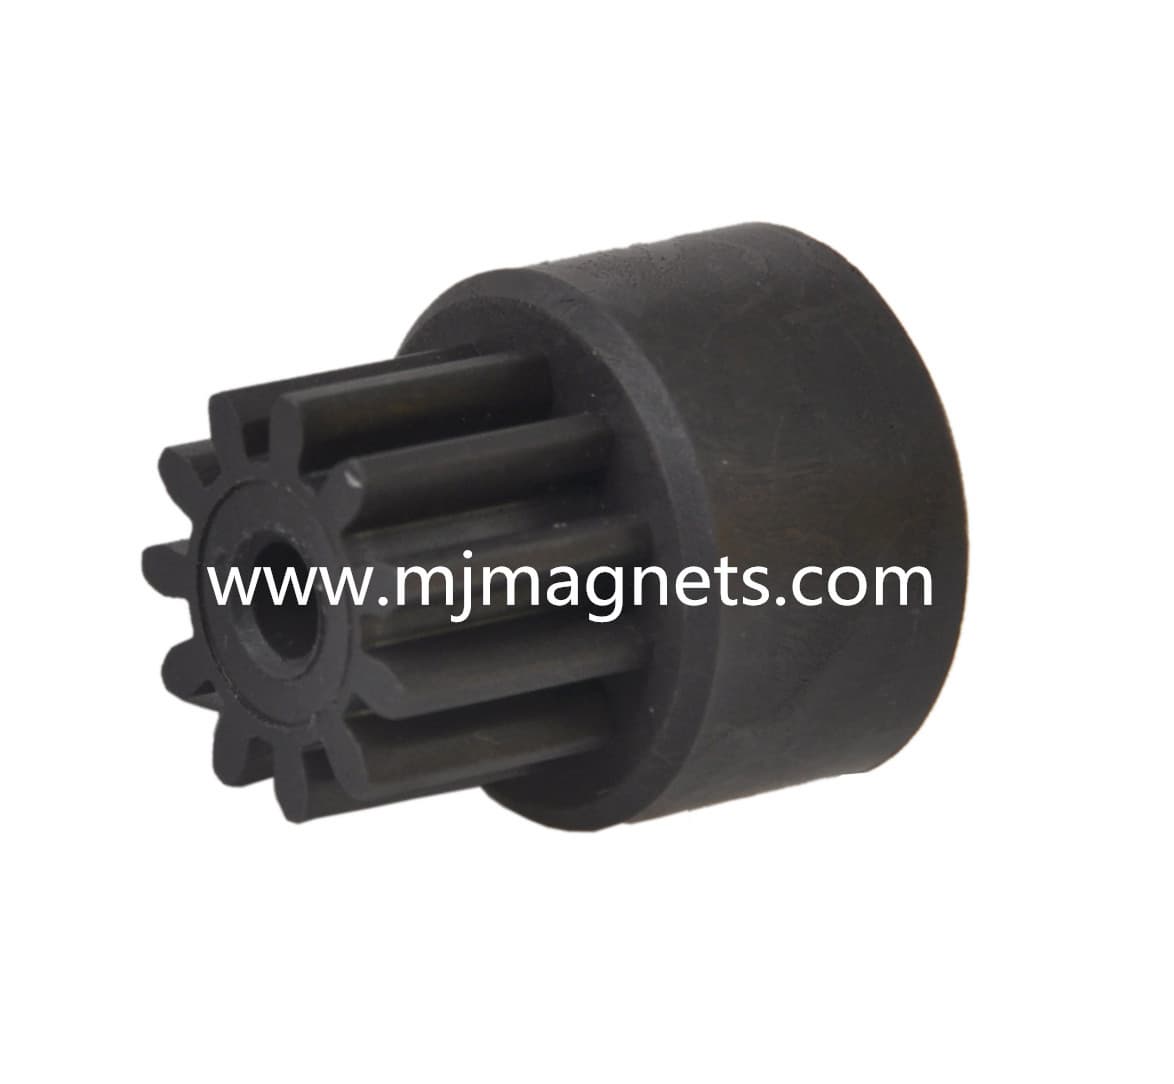 Plastic injection bonded magnetic gear